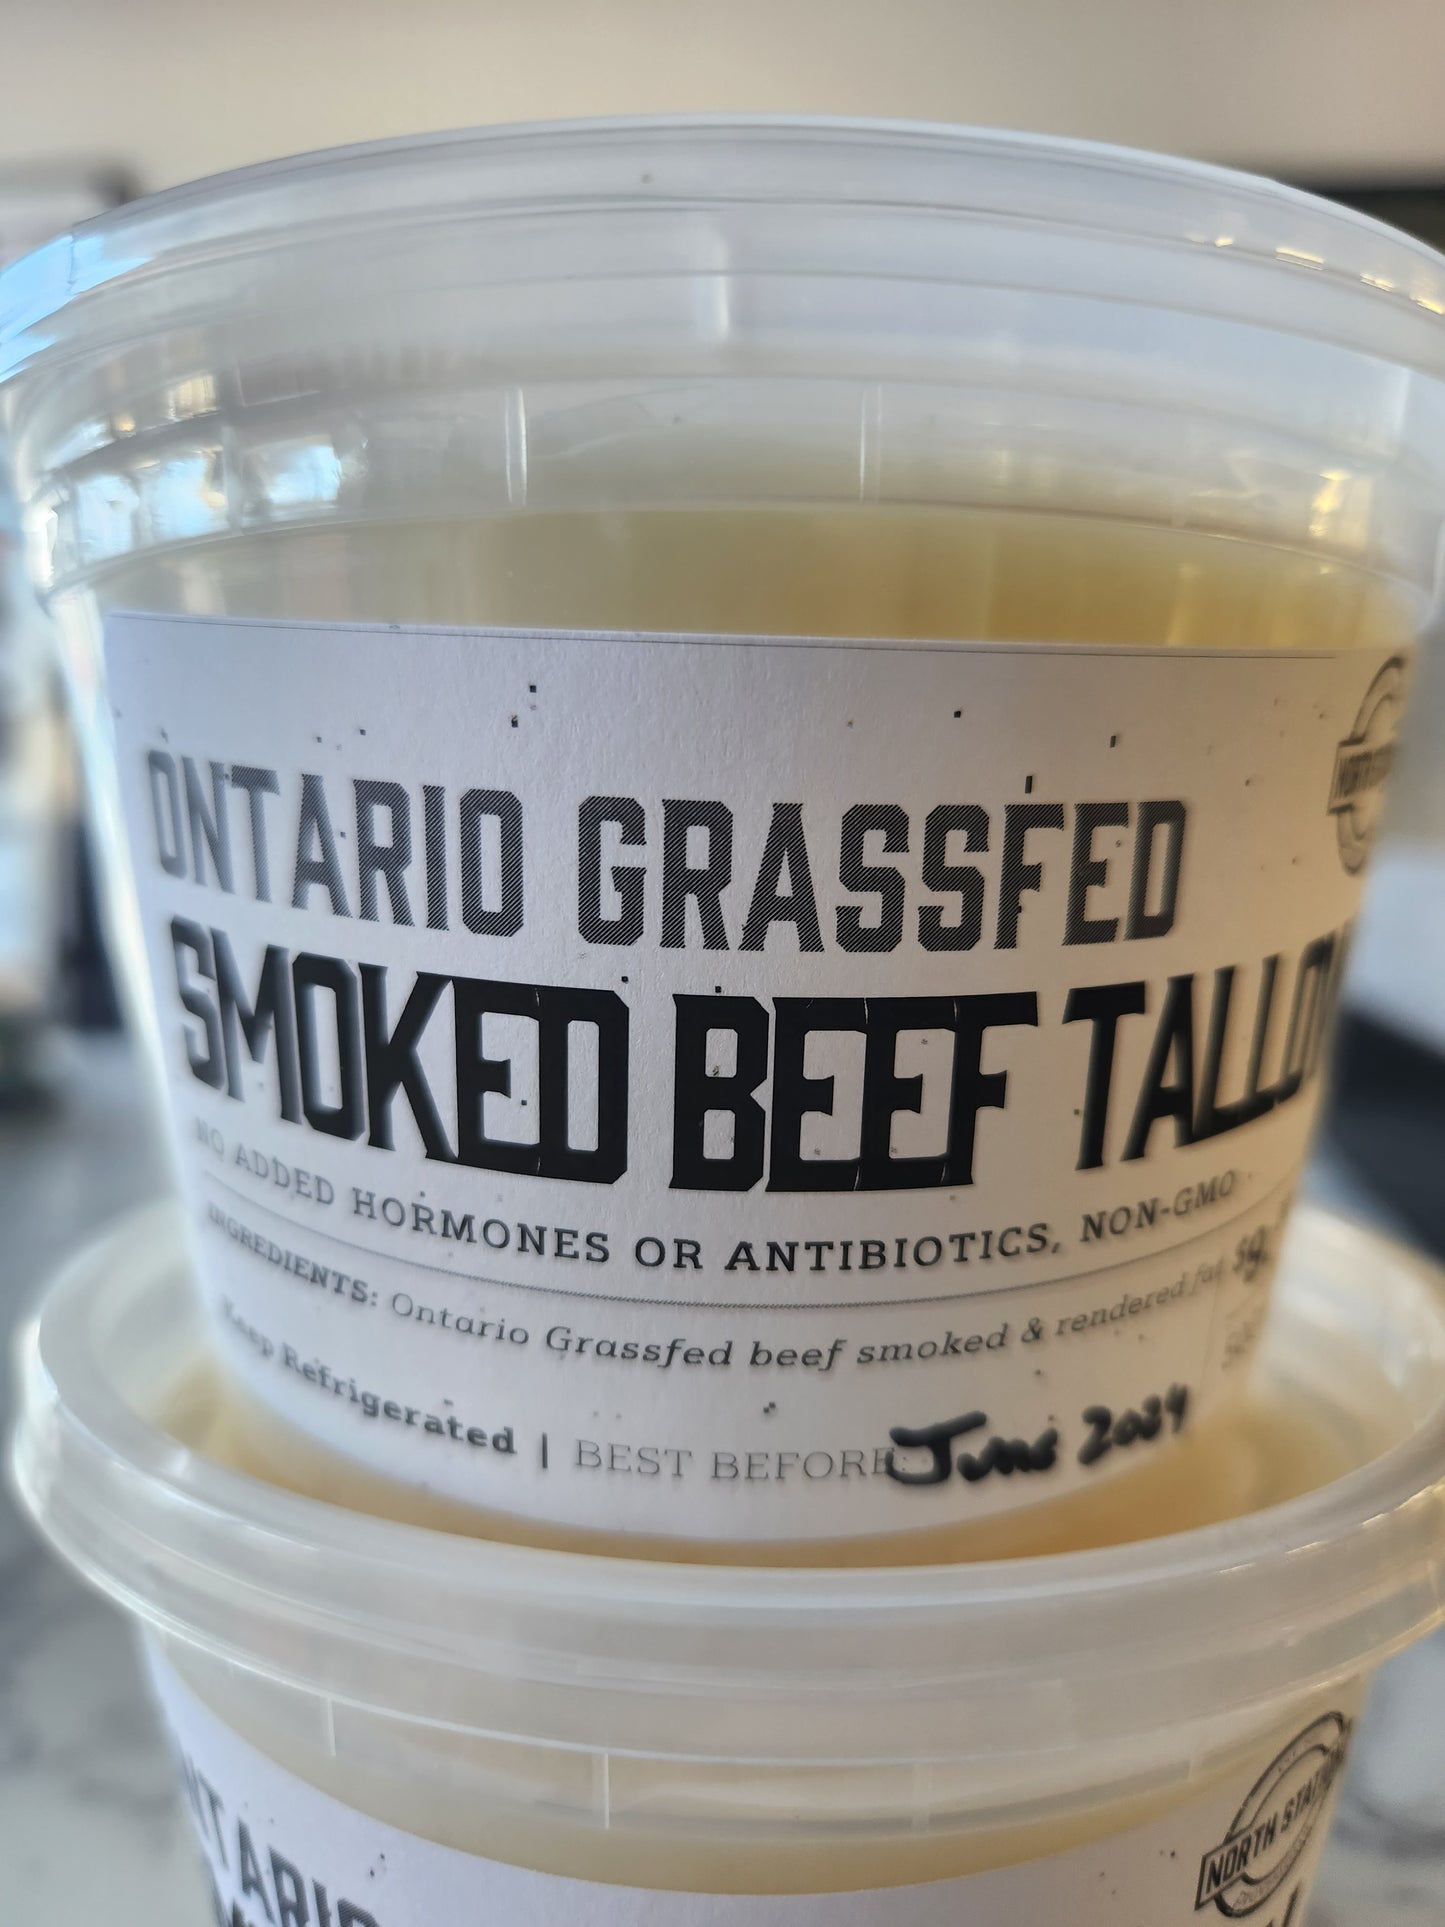 Grassfed Smoked Beef Fat (Tallow)